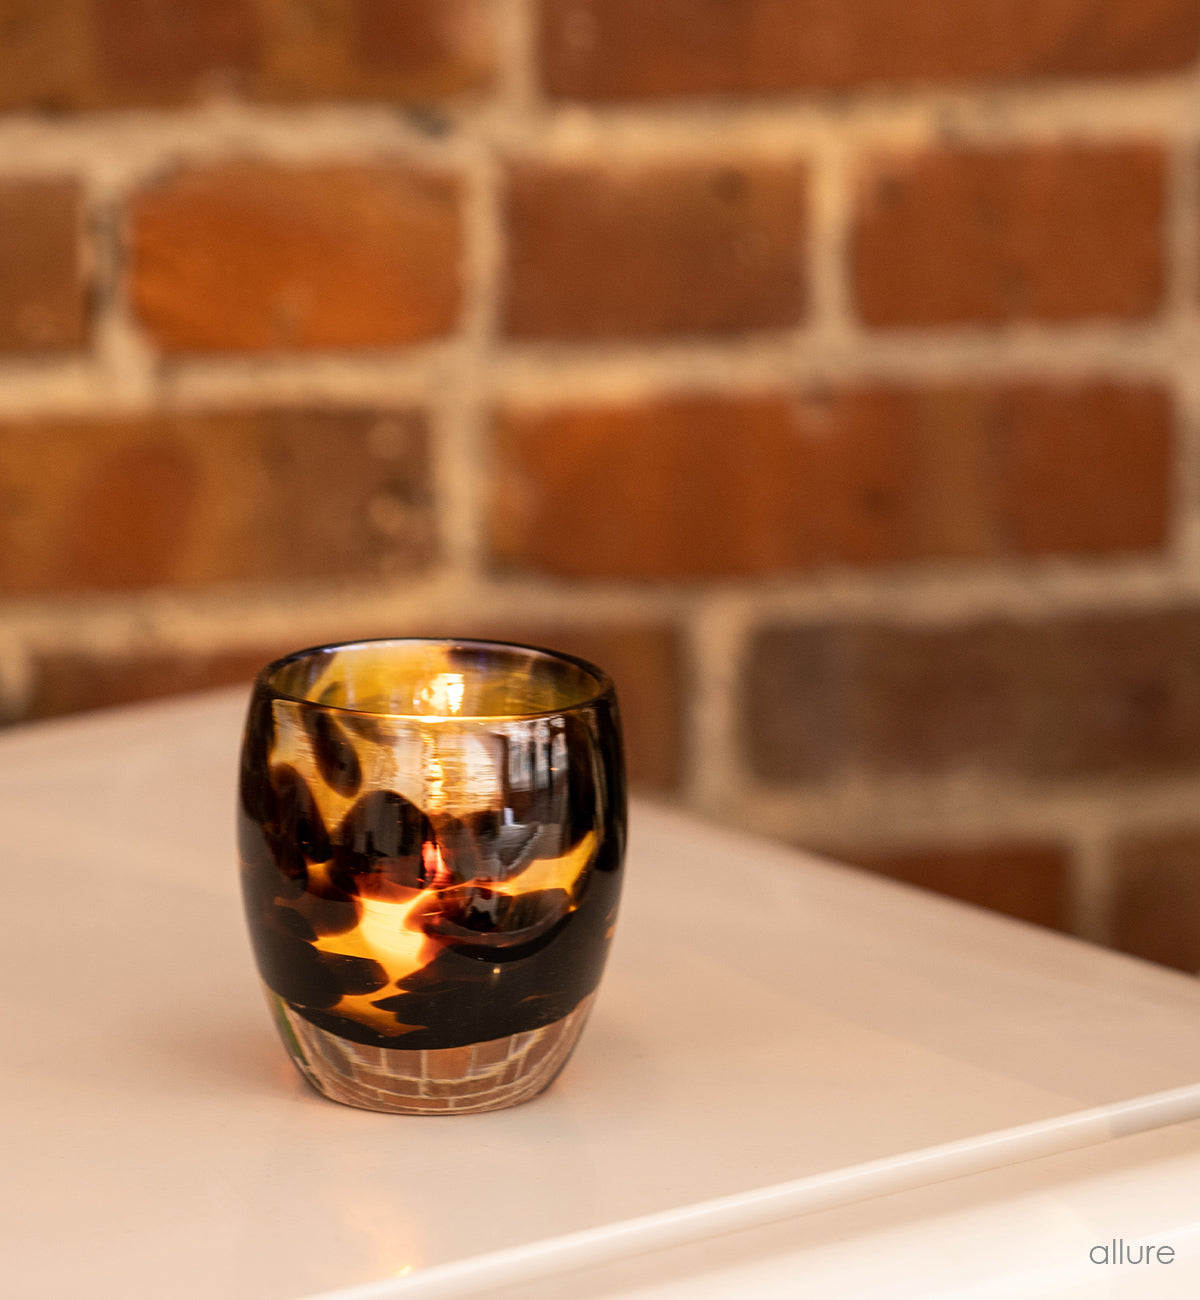  allure brown and gold hand-blown glass votive candle holder